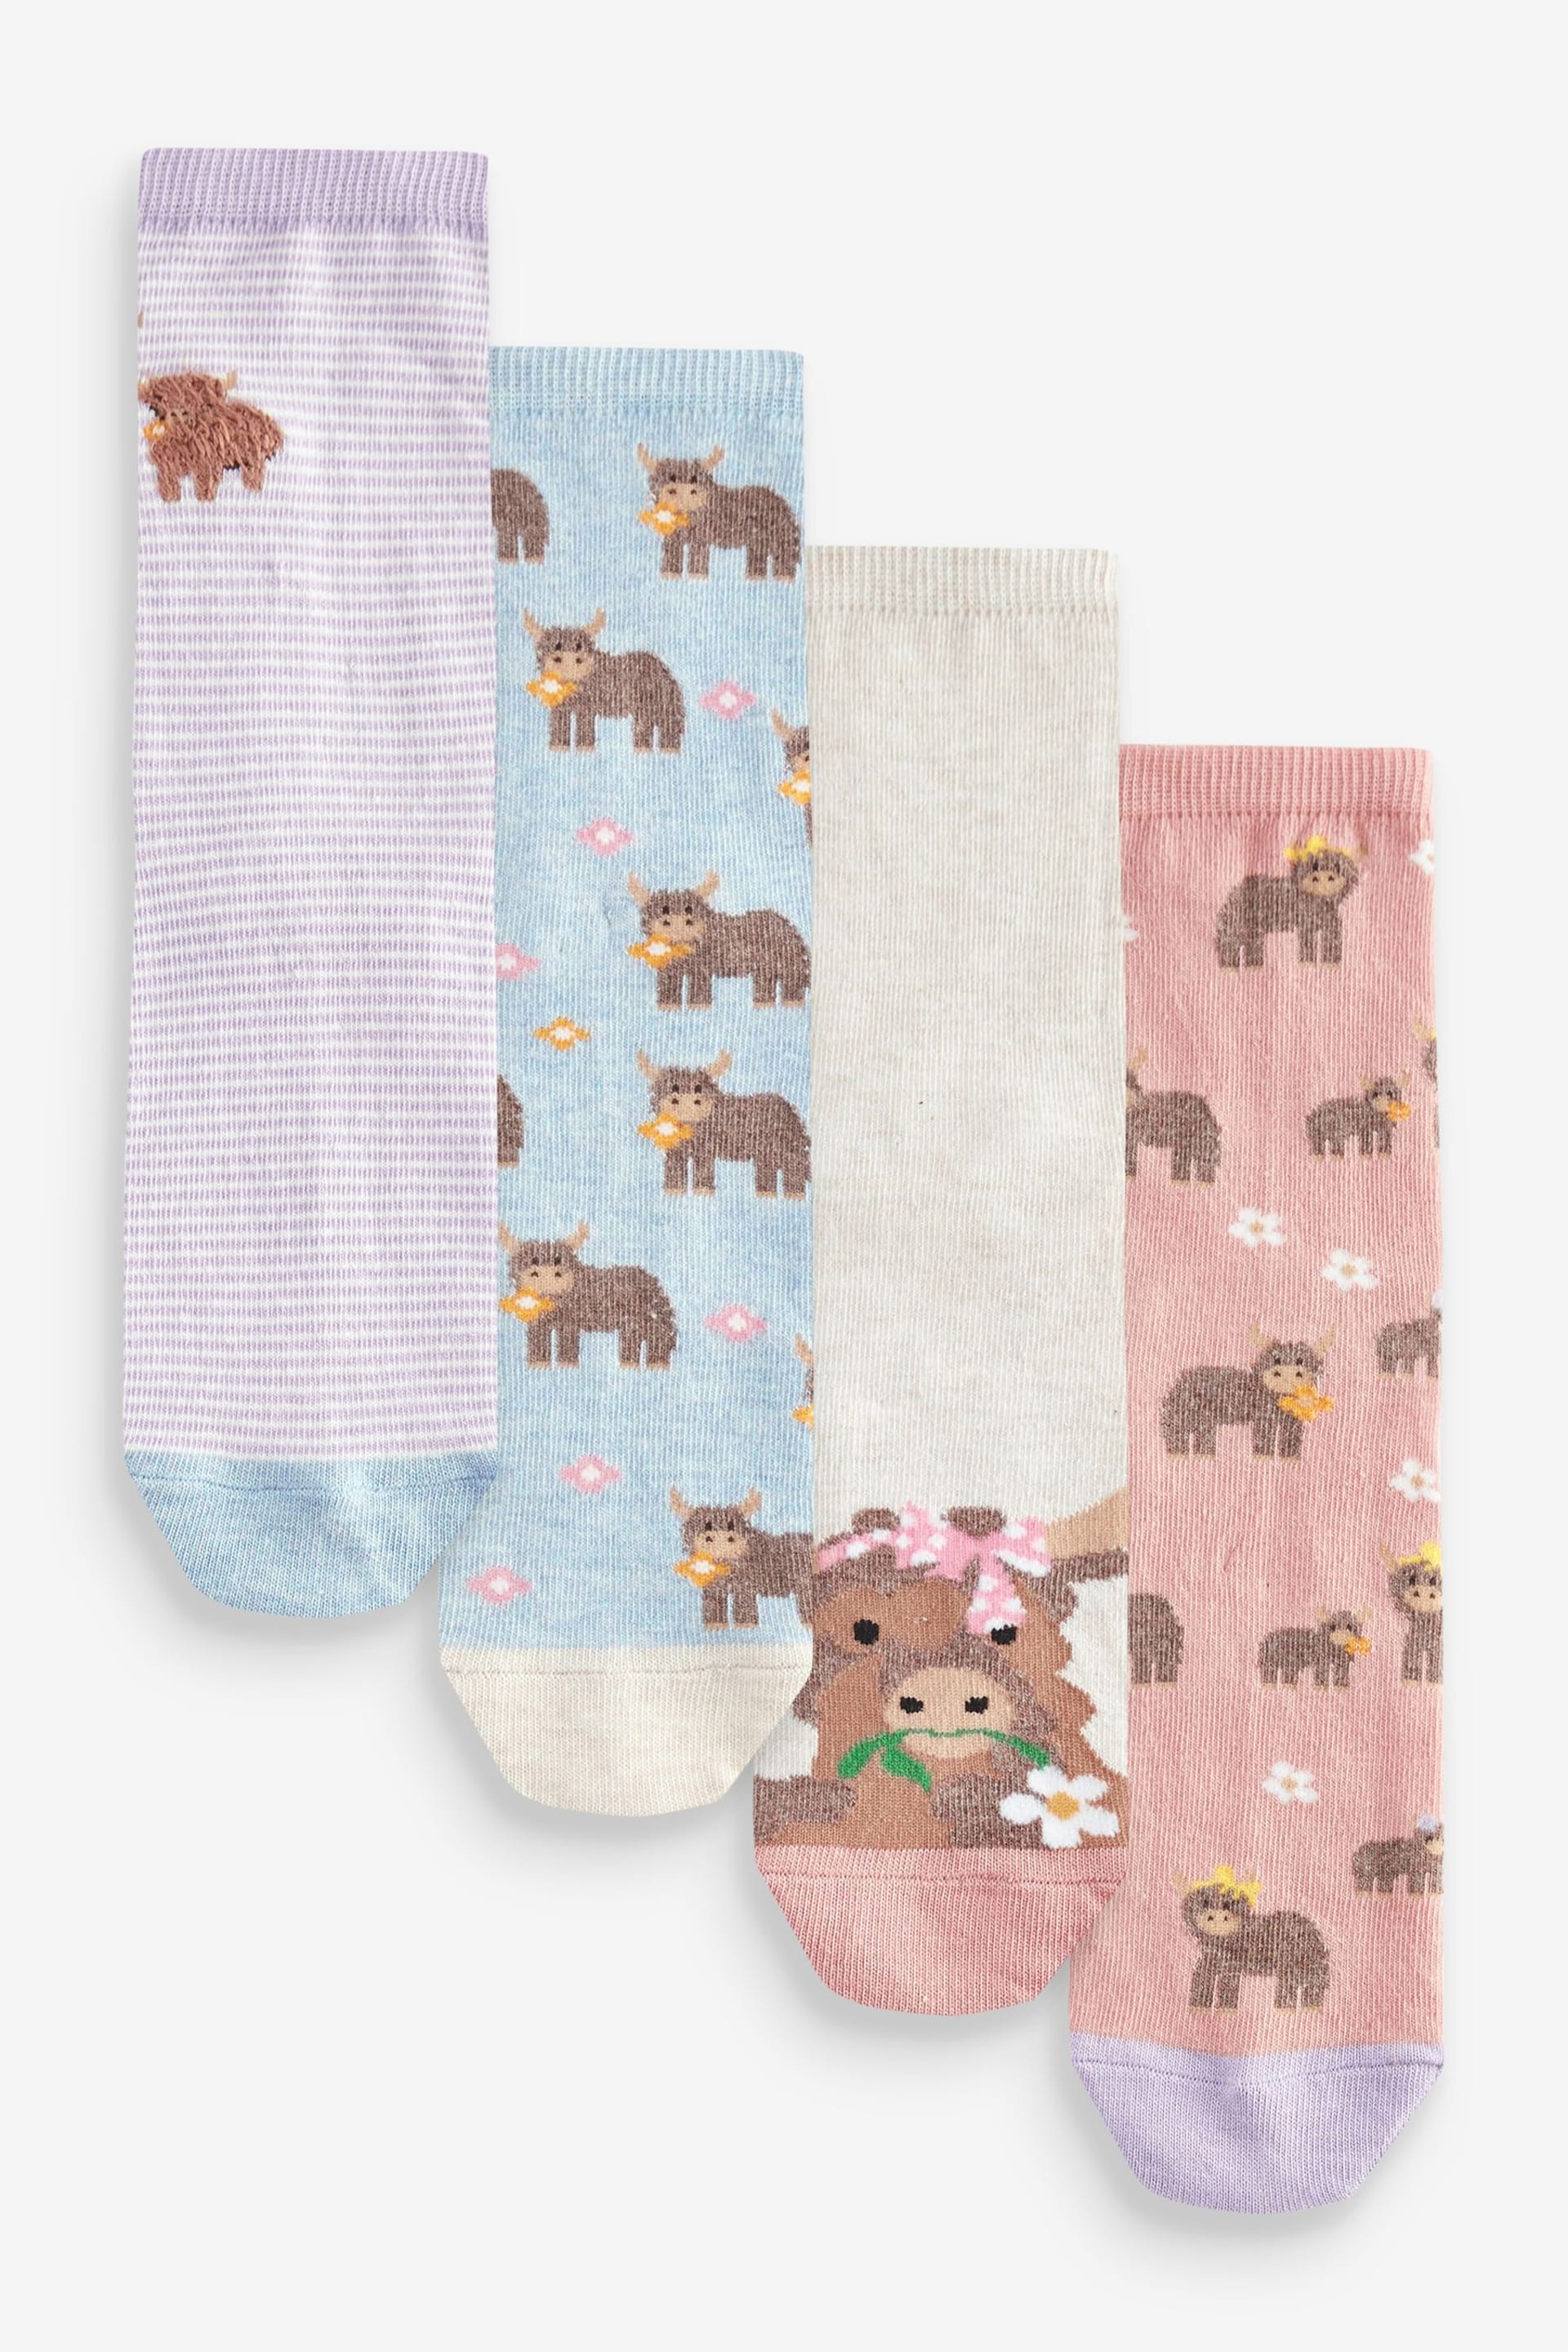 Pink/Lilac/Oatmeal Hamish the Highland Cow Ankle Socks 4 Pack - Image 1 of 5